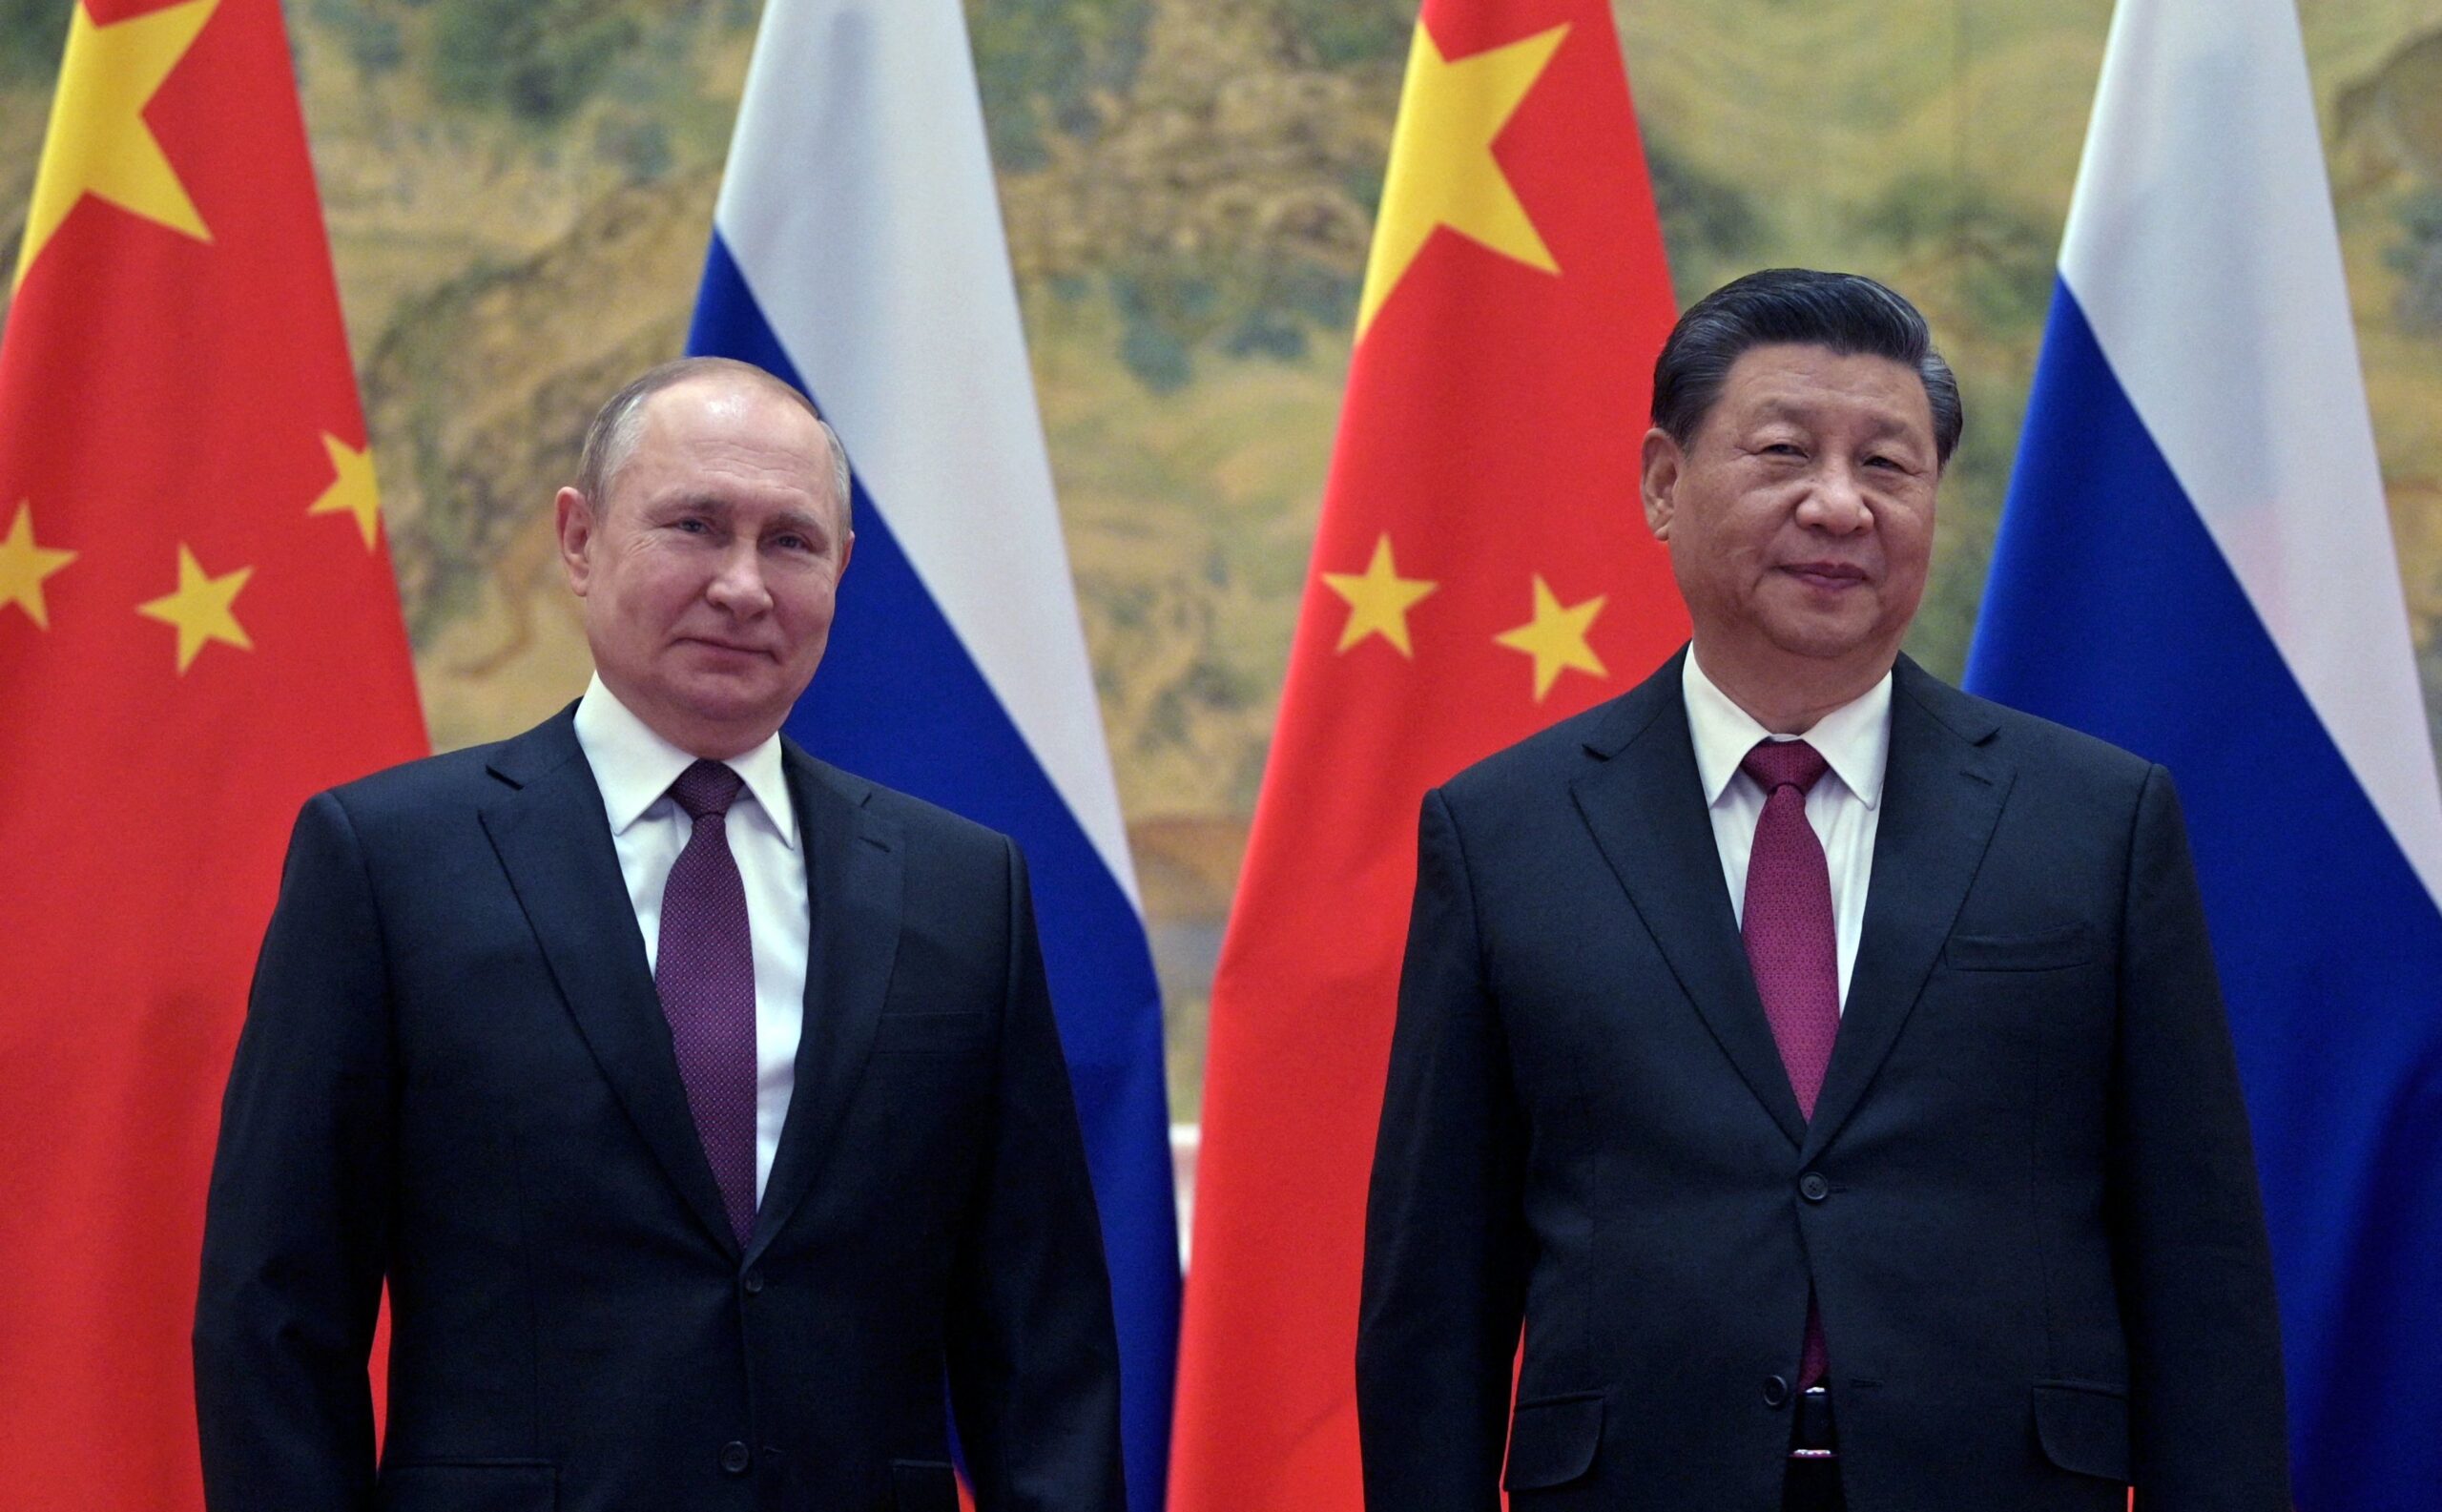 China’s amateur investors are betting big time on a boost to Russian trade